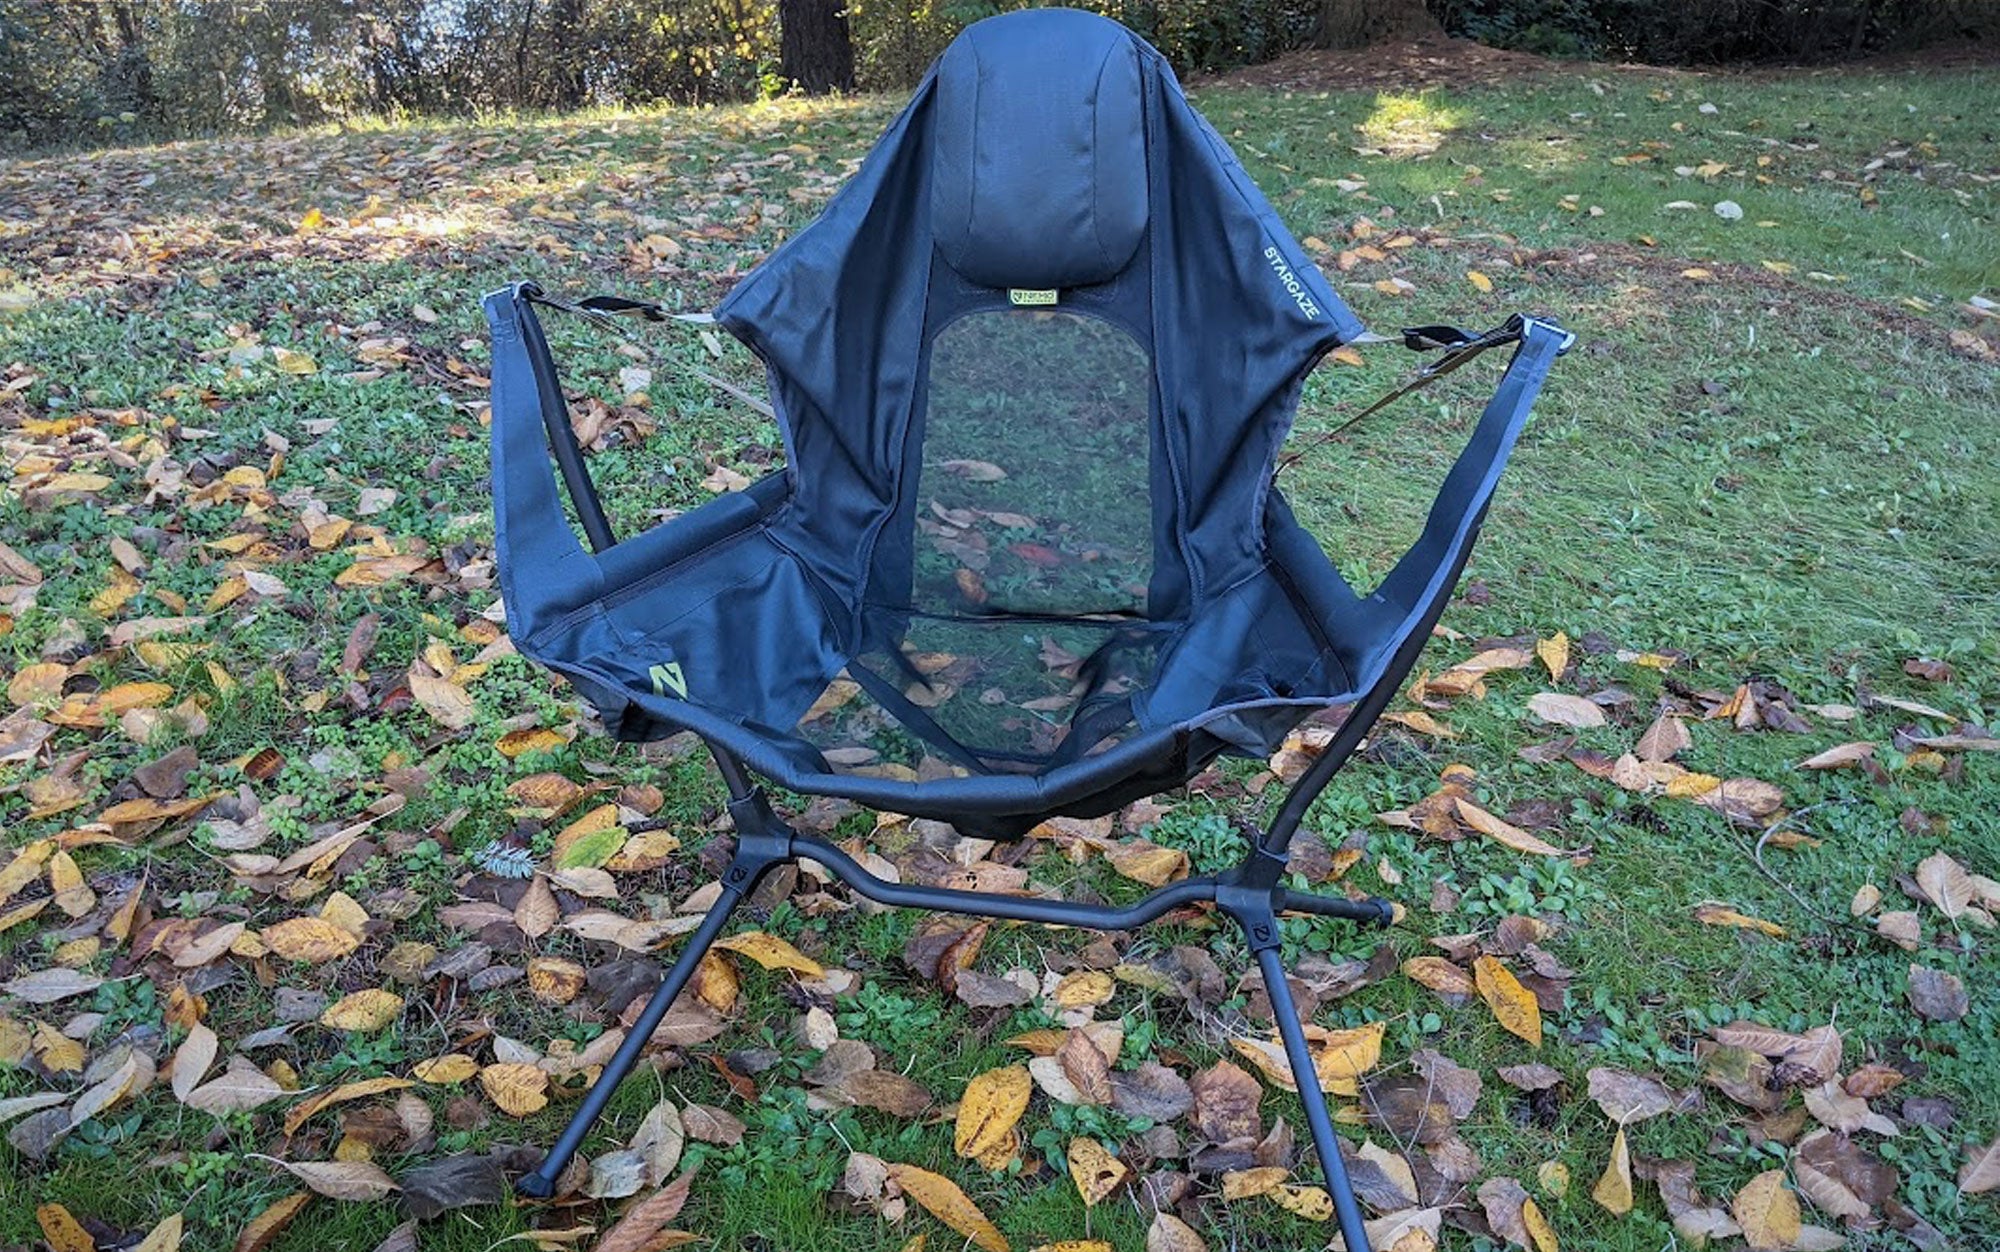 We tested the Nemo Stargaze camp chair.